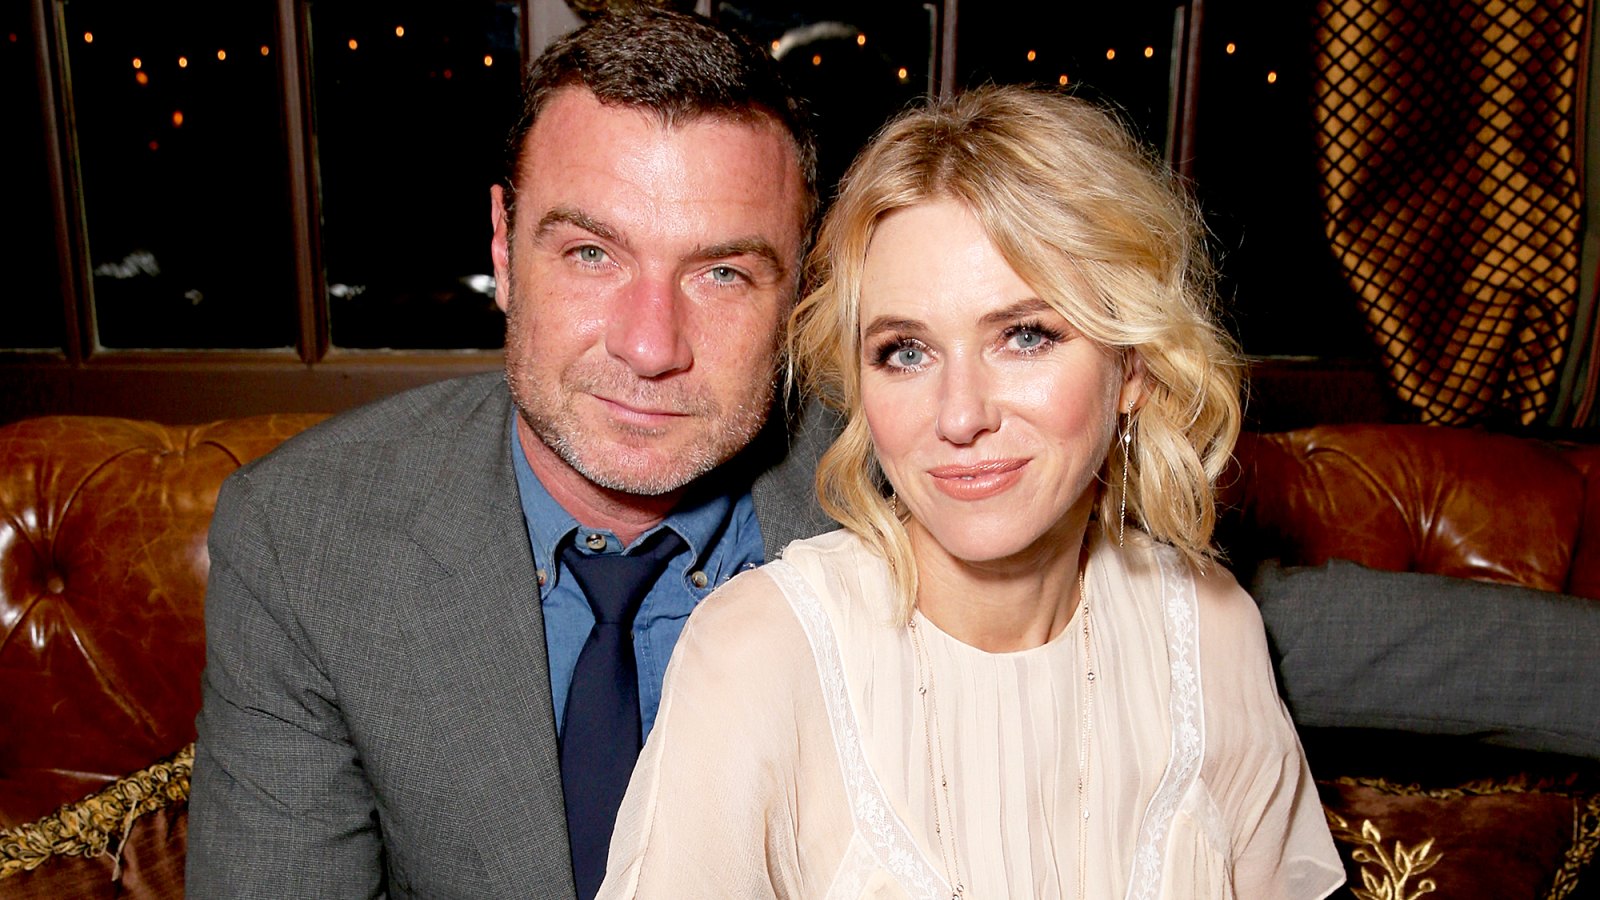 Liev Schreiber and Naomi Watts attend the Hollywood Foreign Press Association and the 2016 Toronto International Film Festival at Windsor Arms Hotel in Toronto, Canada.